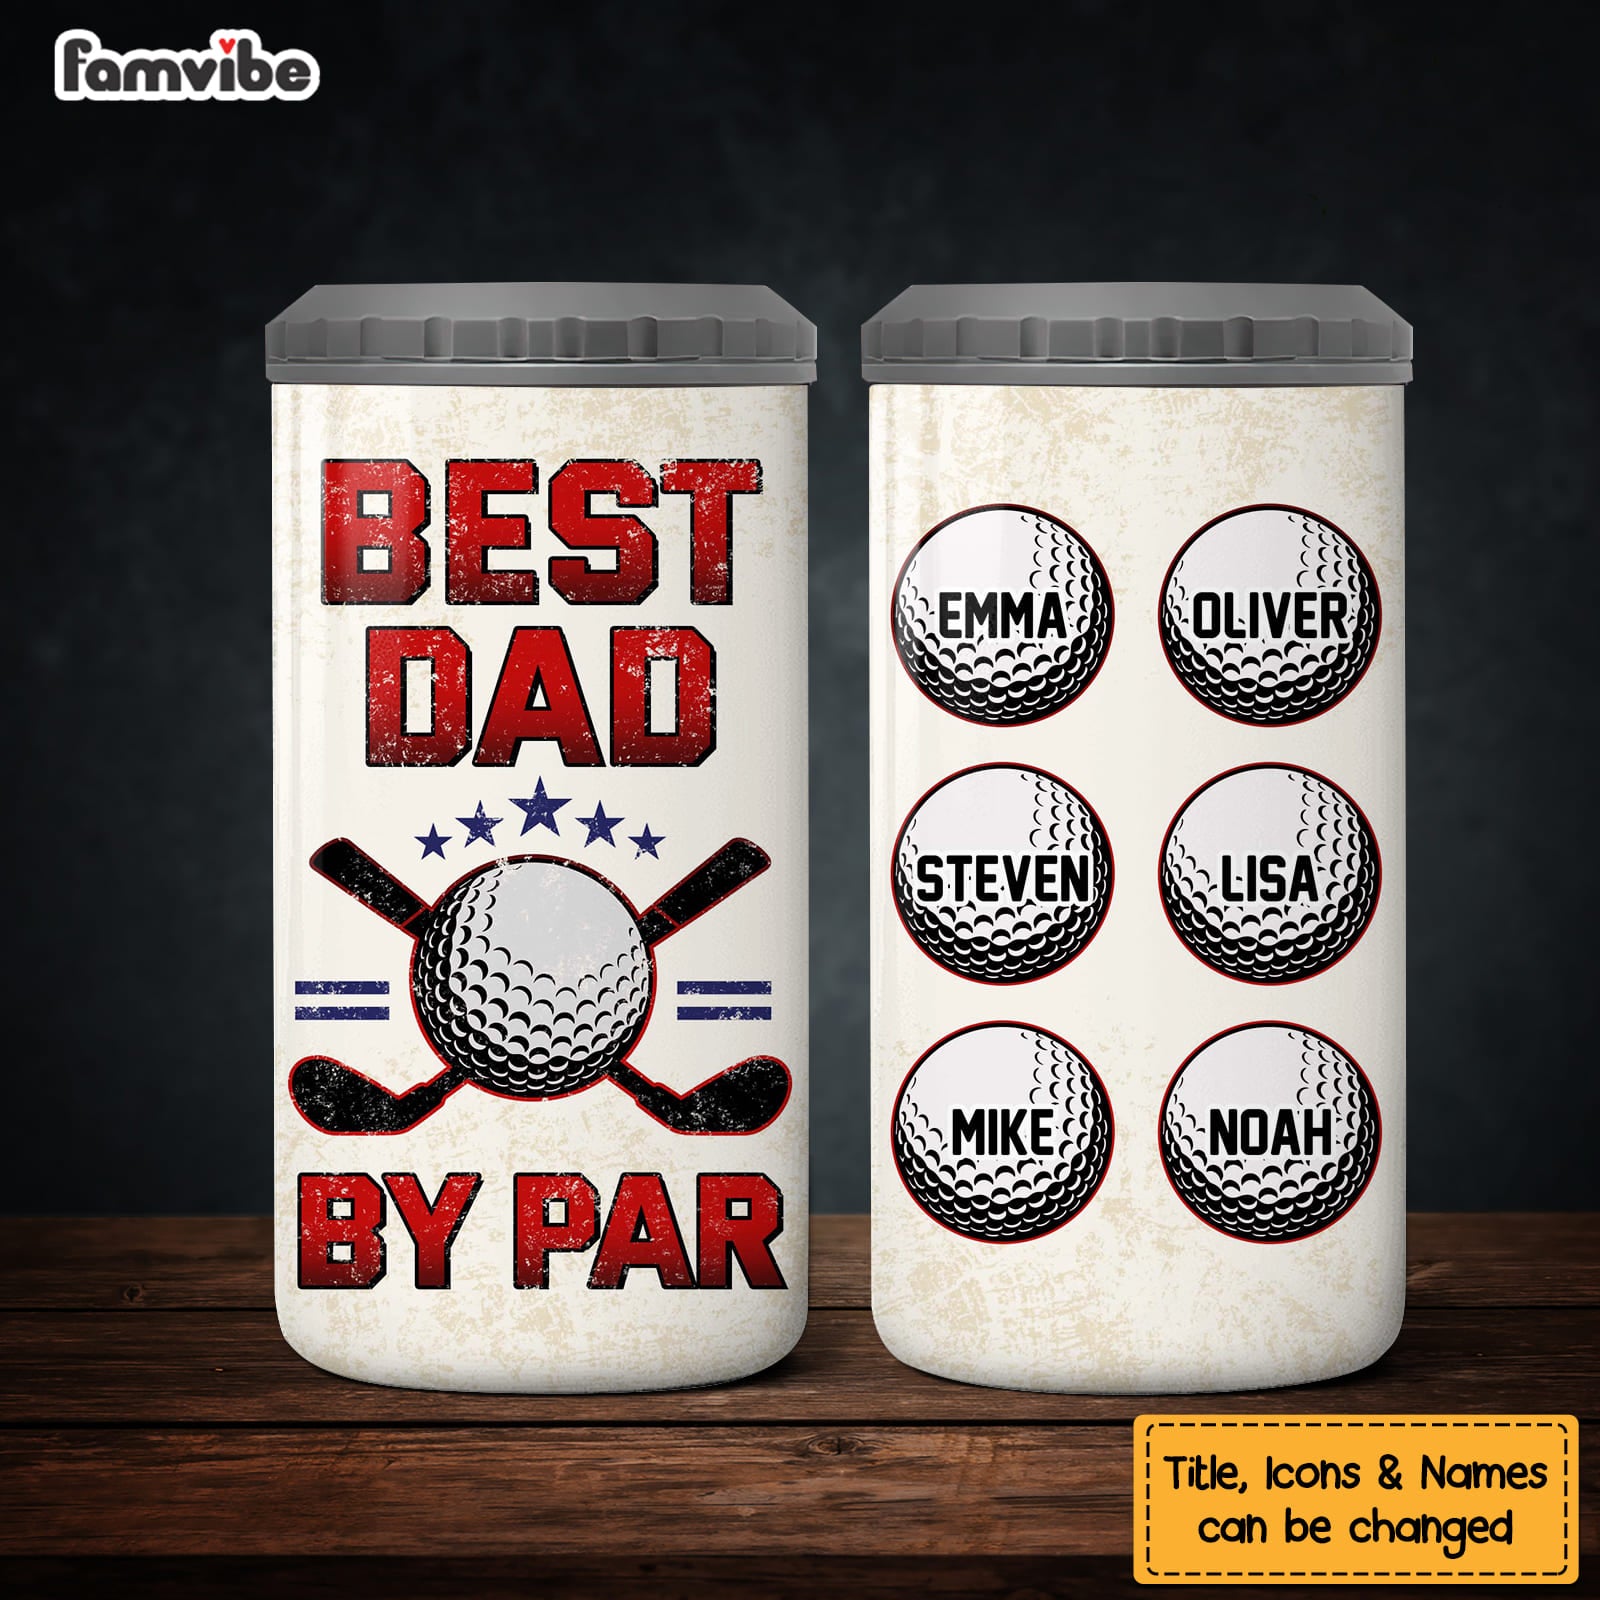 Personalized Dad Grandpa Tumbler Dadasaurus Father's Day Family